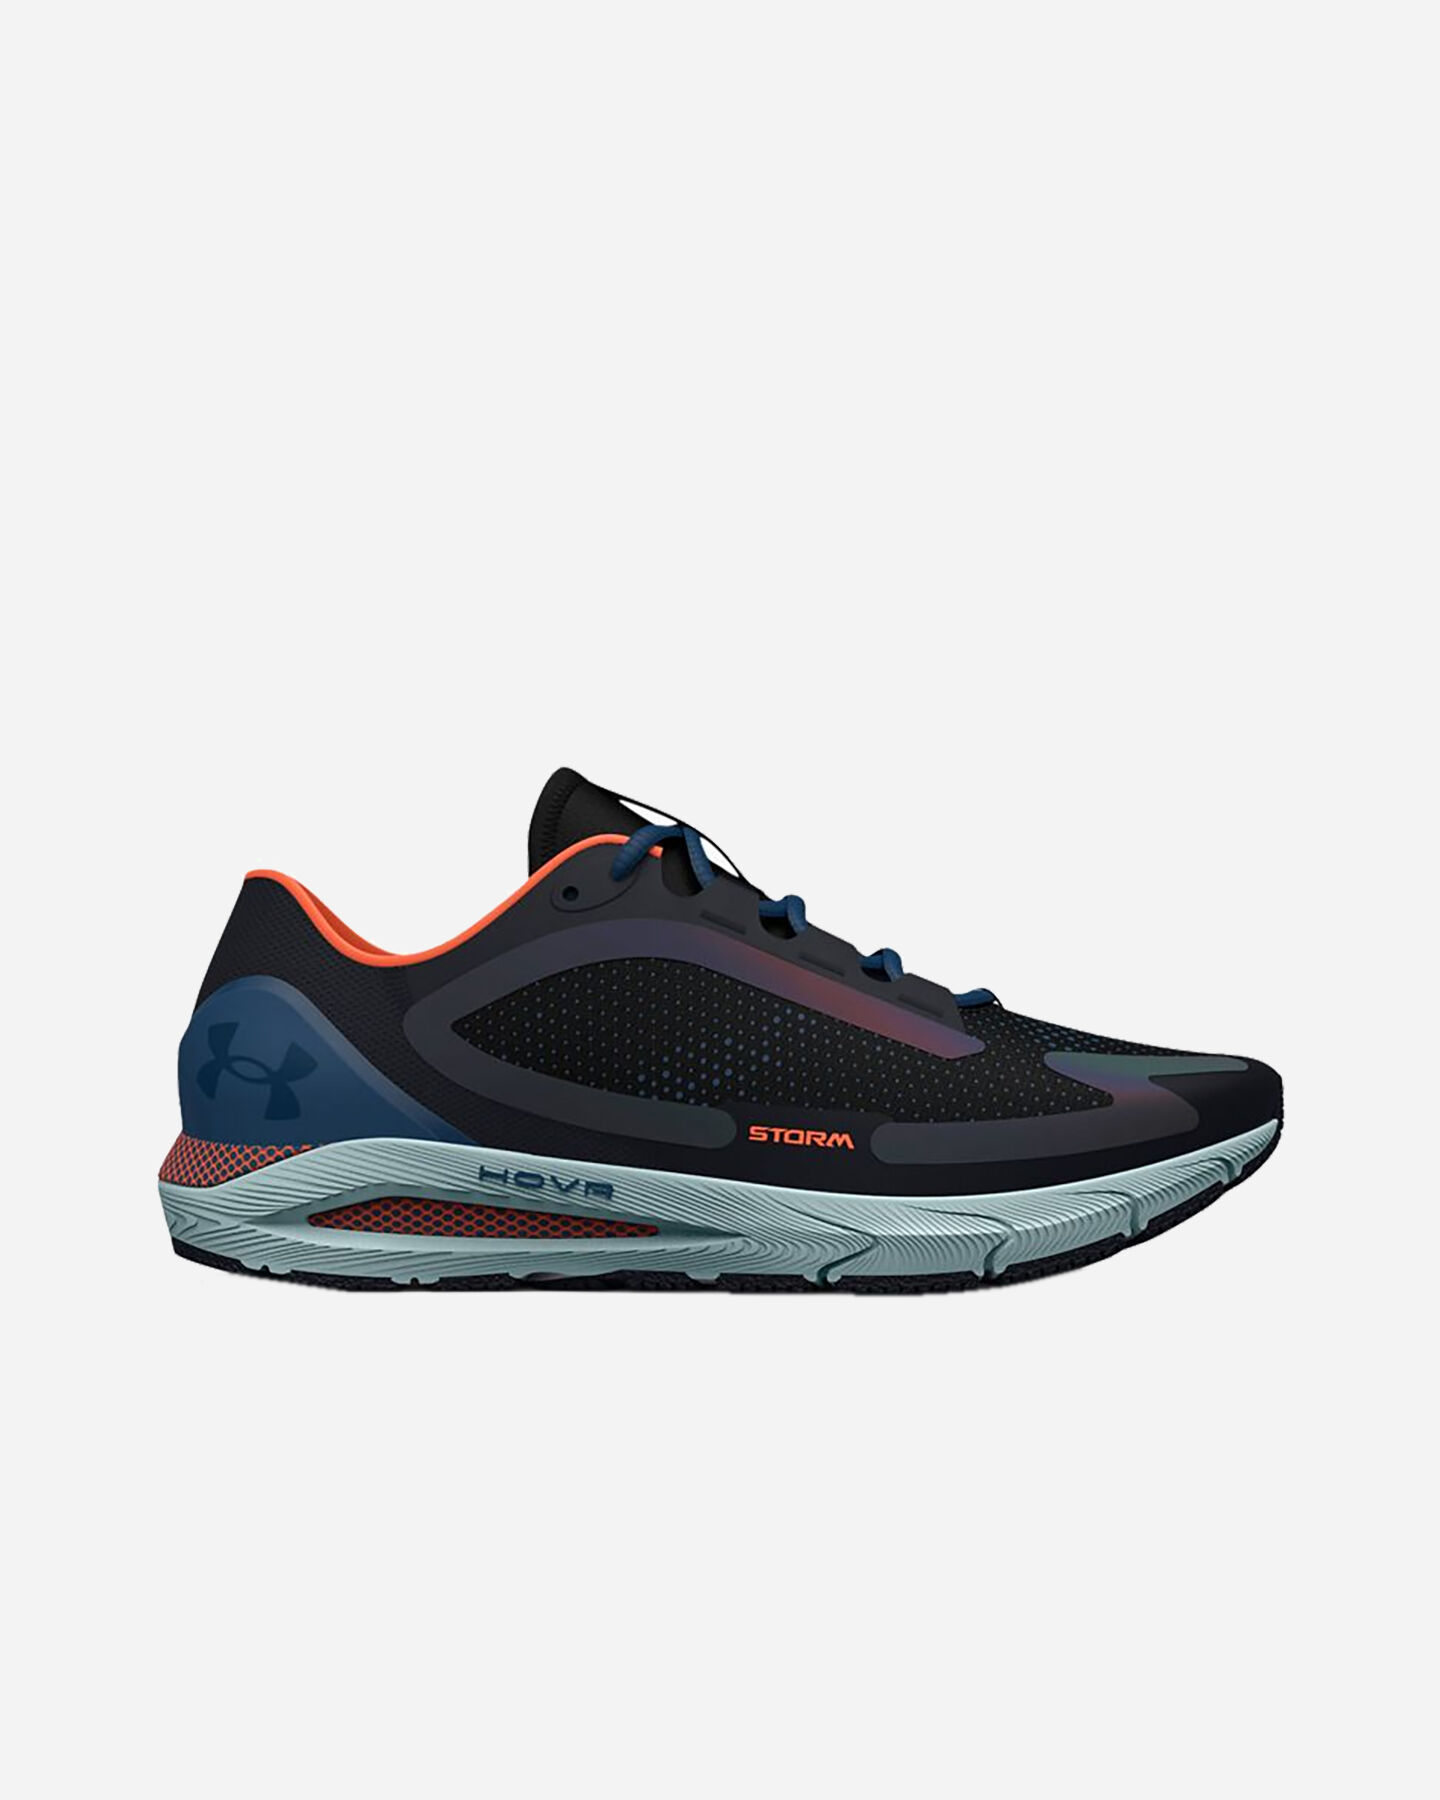  Scarpe running UNDER ARMOUR HOVR SONIC 5 STORM M S5459814|0002|7 scatto 0